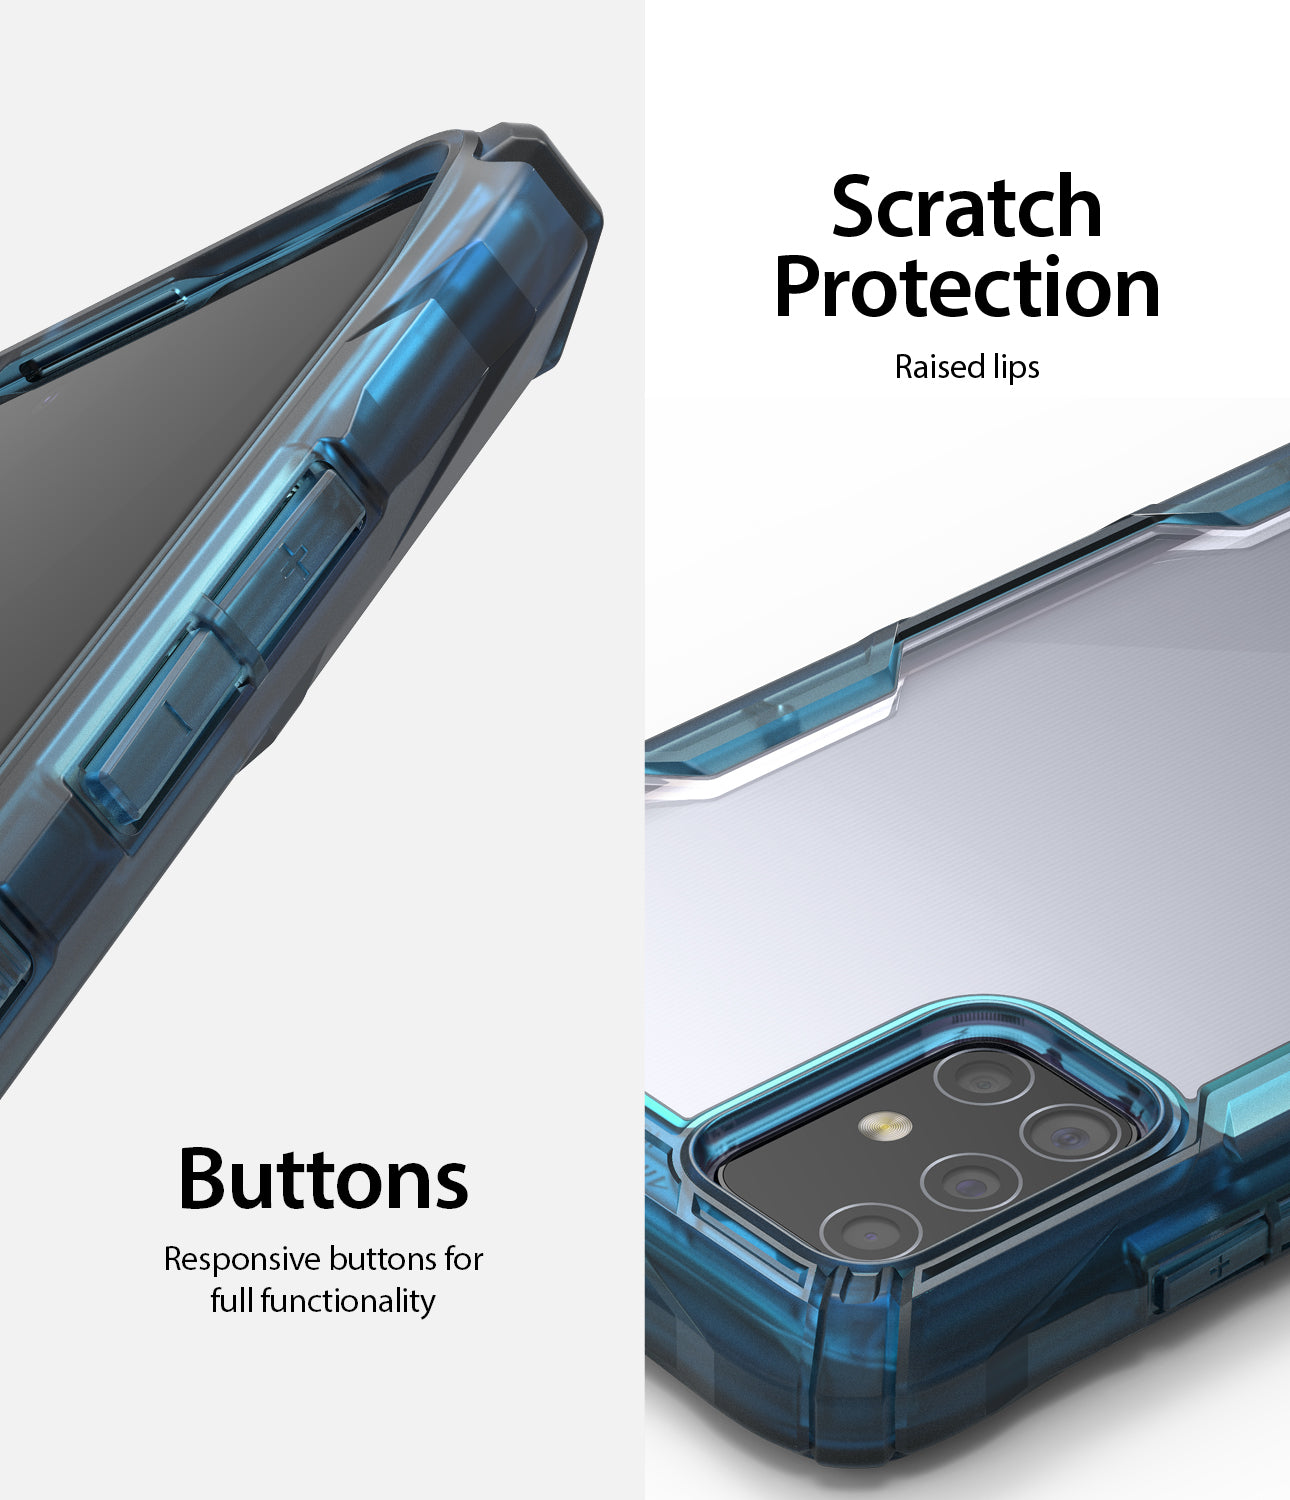 scratch resistant protection with button cutouts